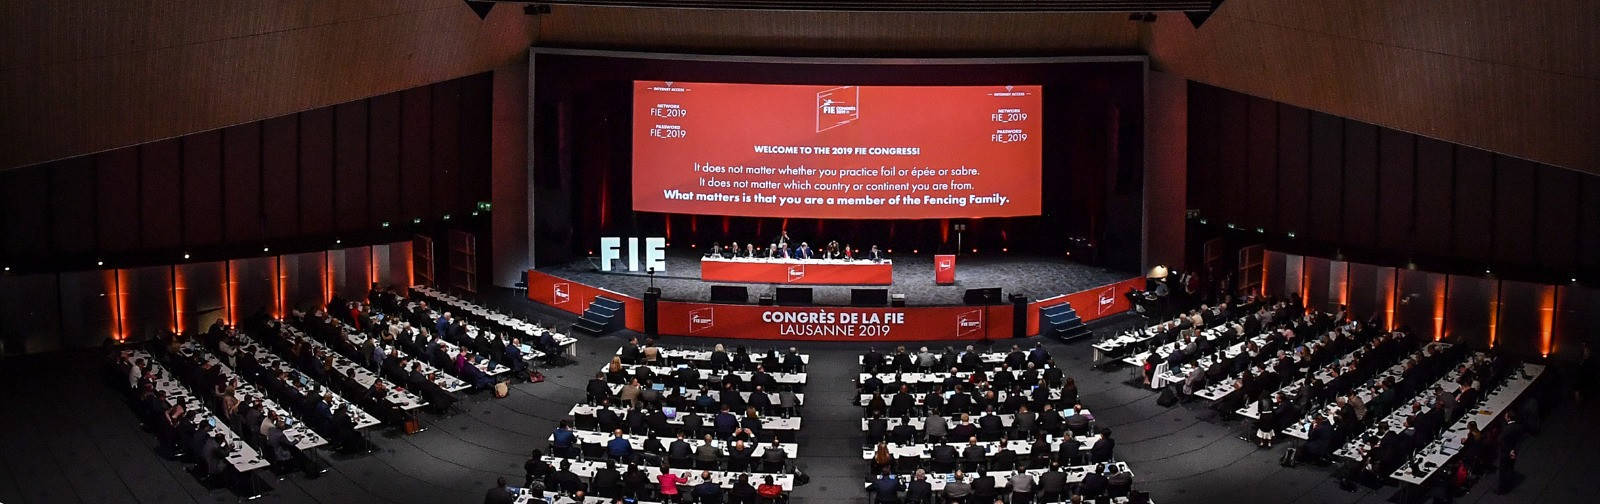 Under the Statues of the FIE, Elective Congresses are always held in Olympic years ©FIE